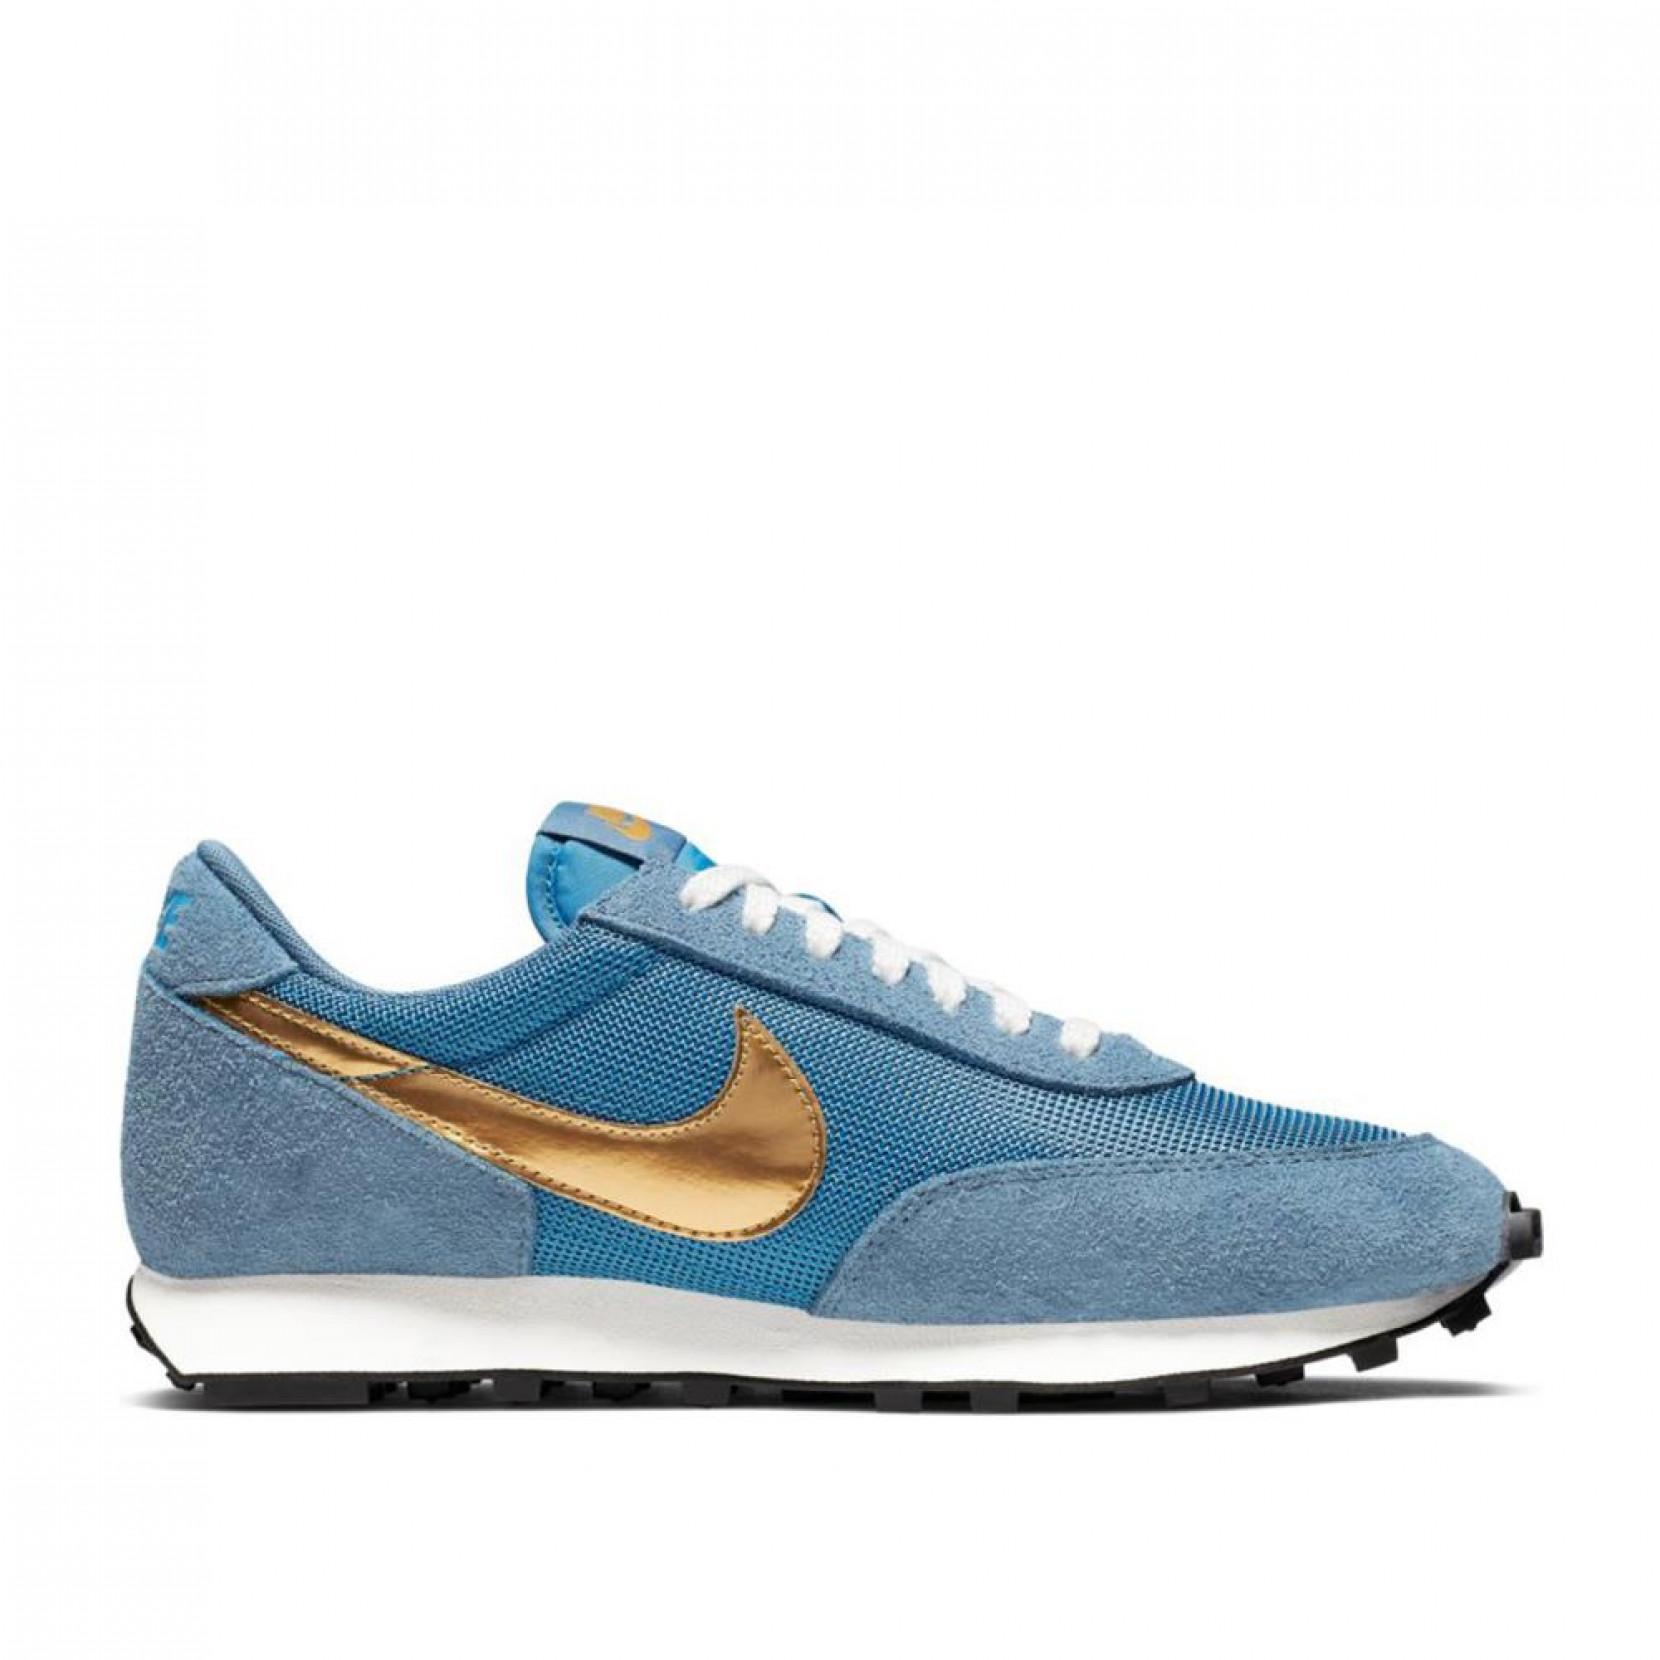 Nike Daybreak Sp Suede And Mesh Sneakers in Blue for Men - Save 57% - Lyst